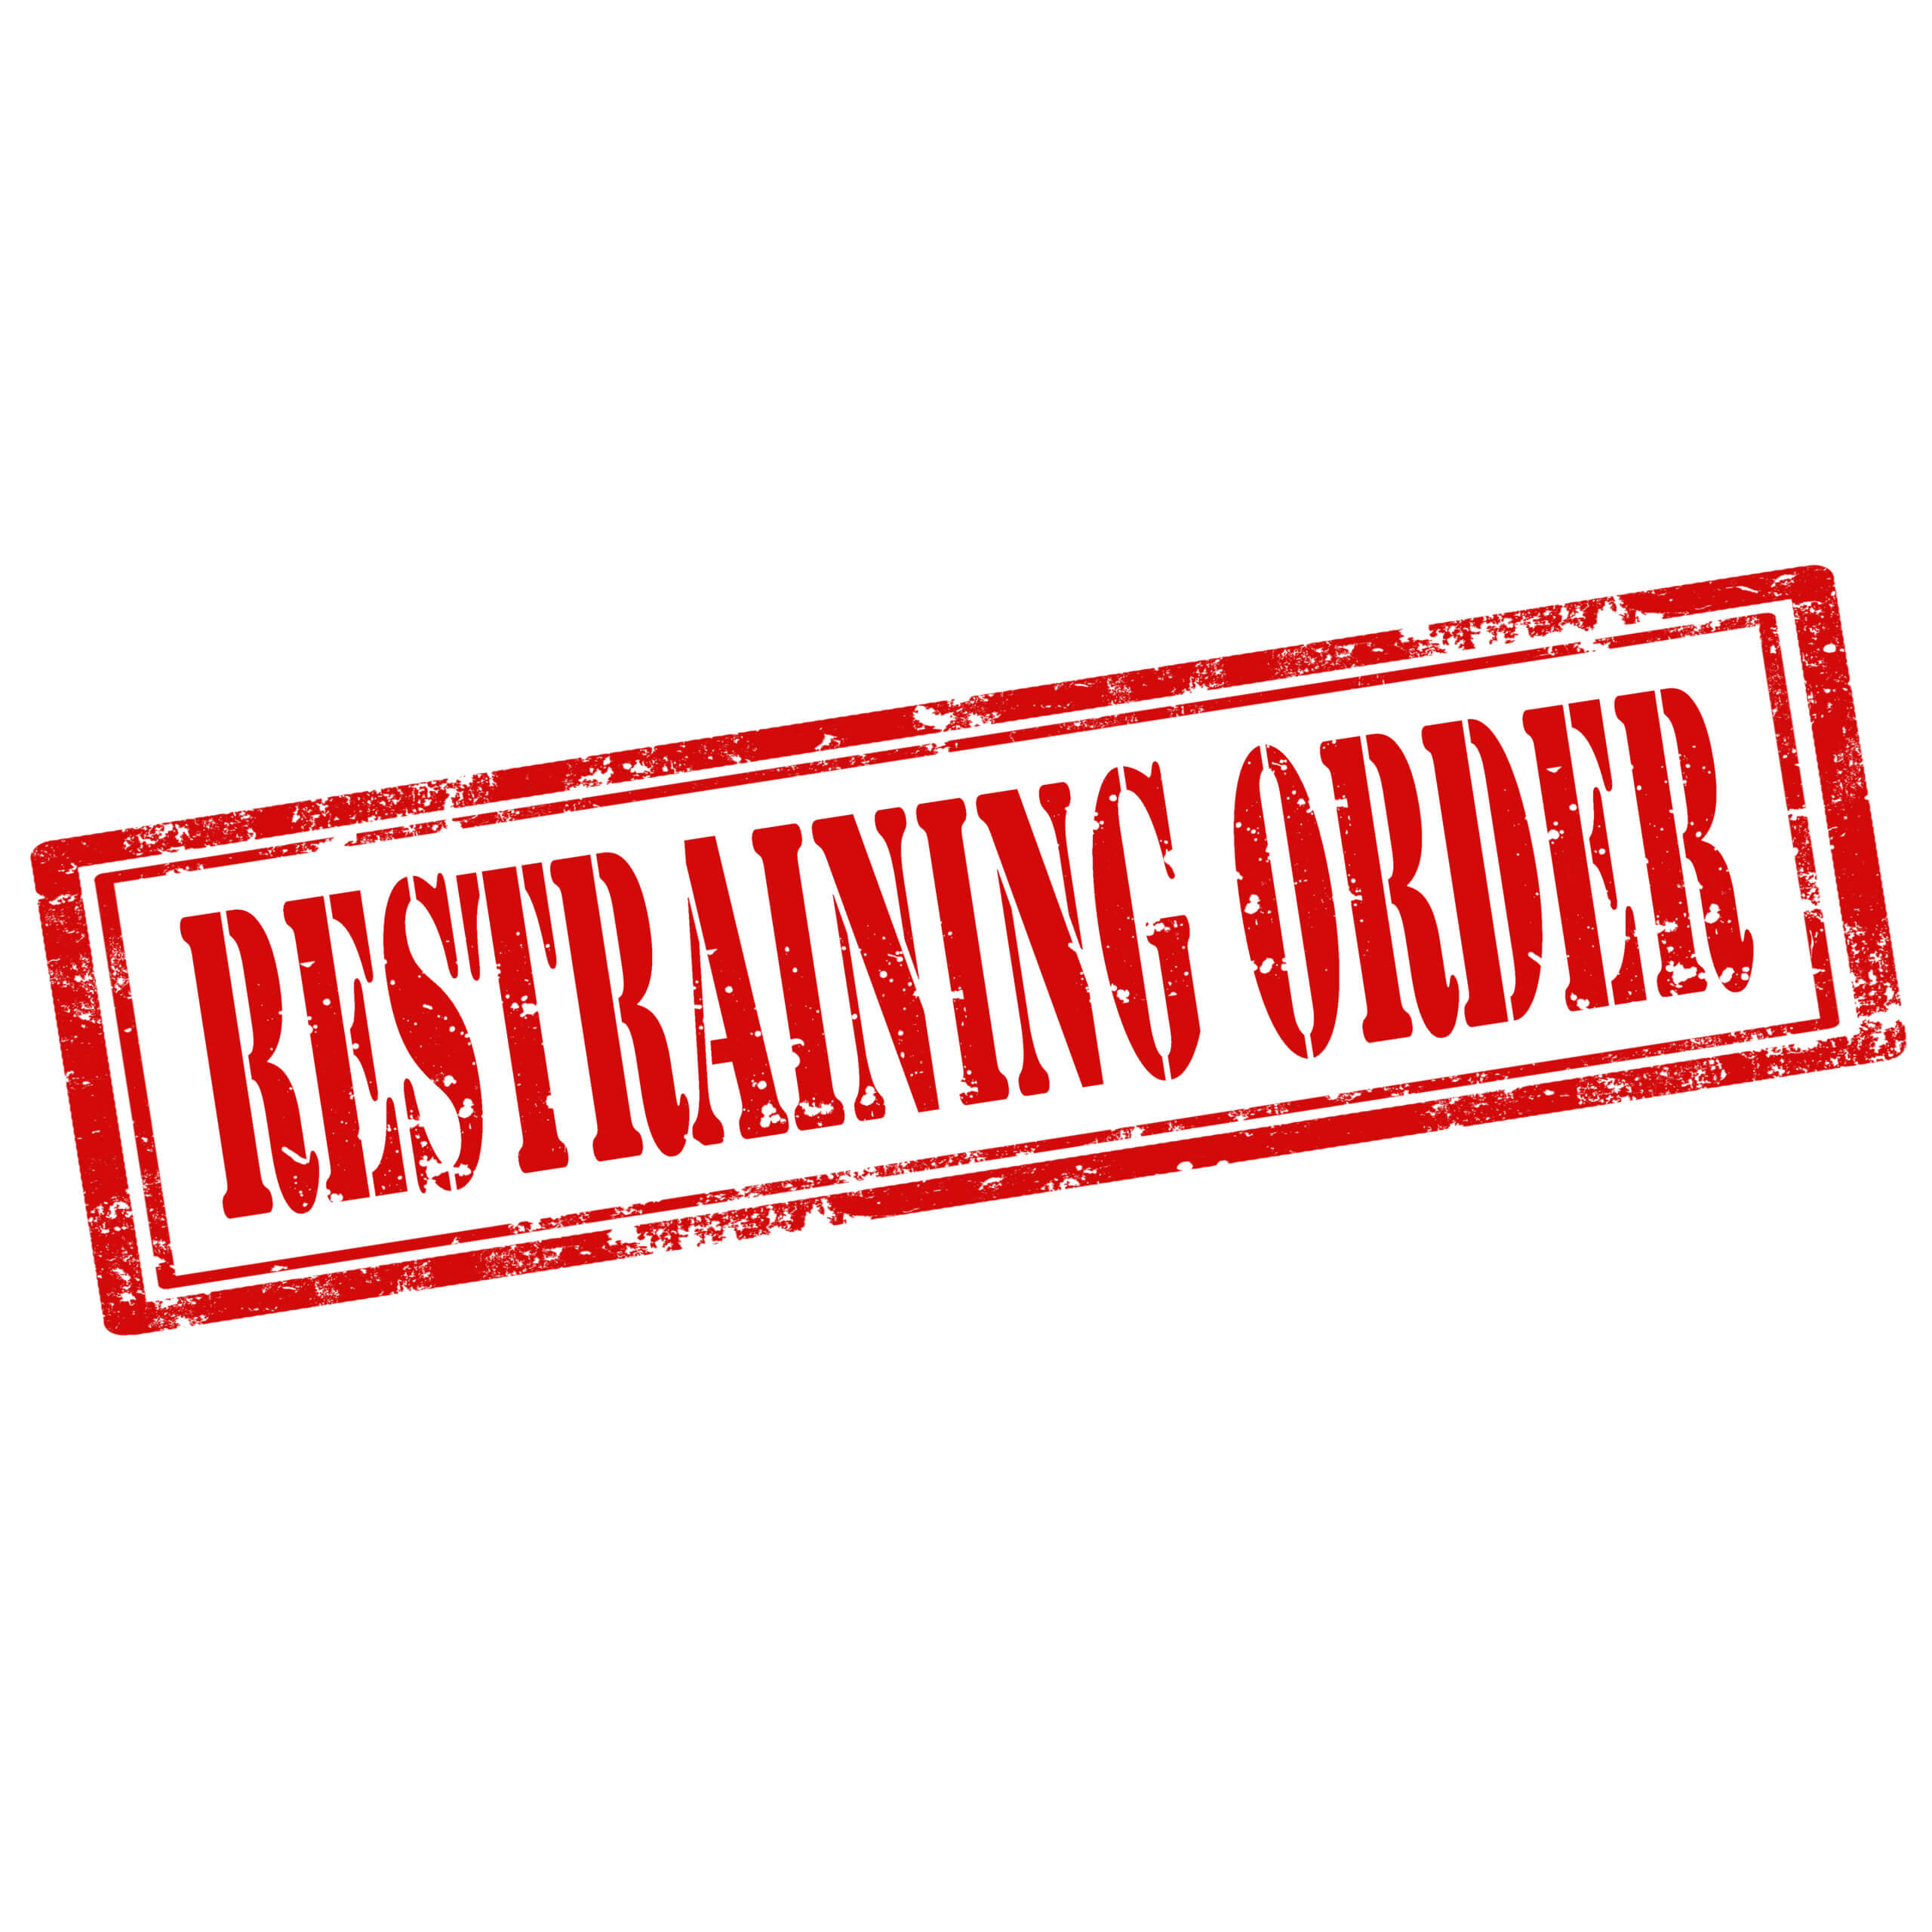 How Serious are Restraining Orders in NJ